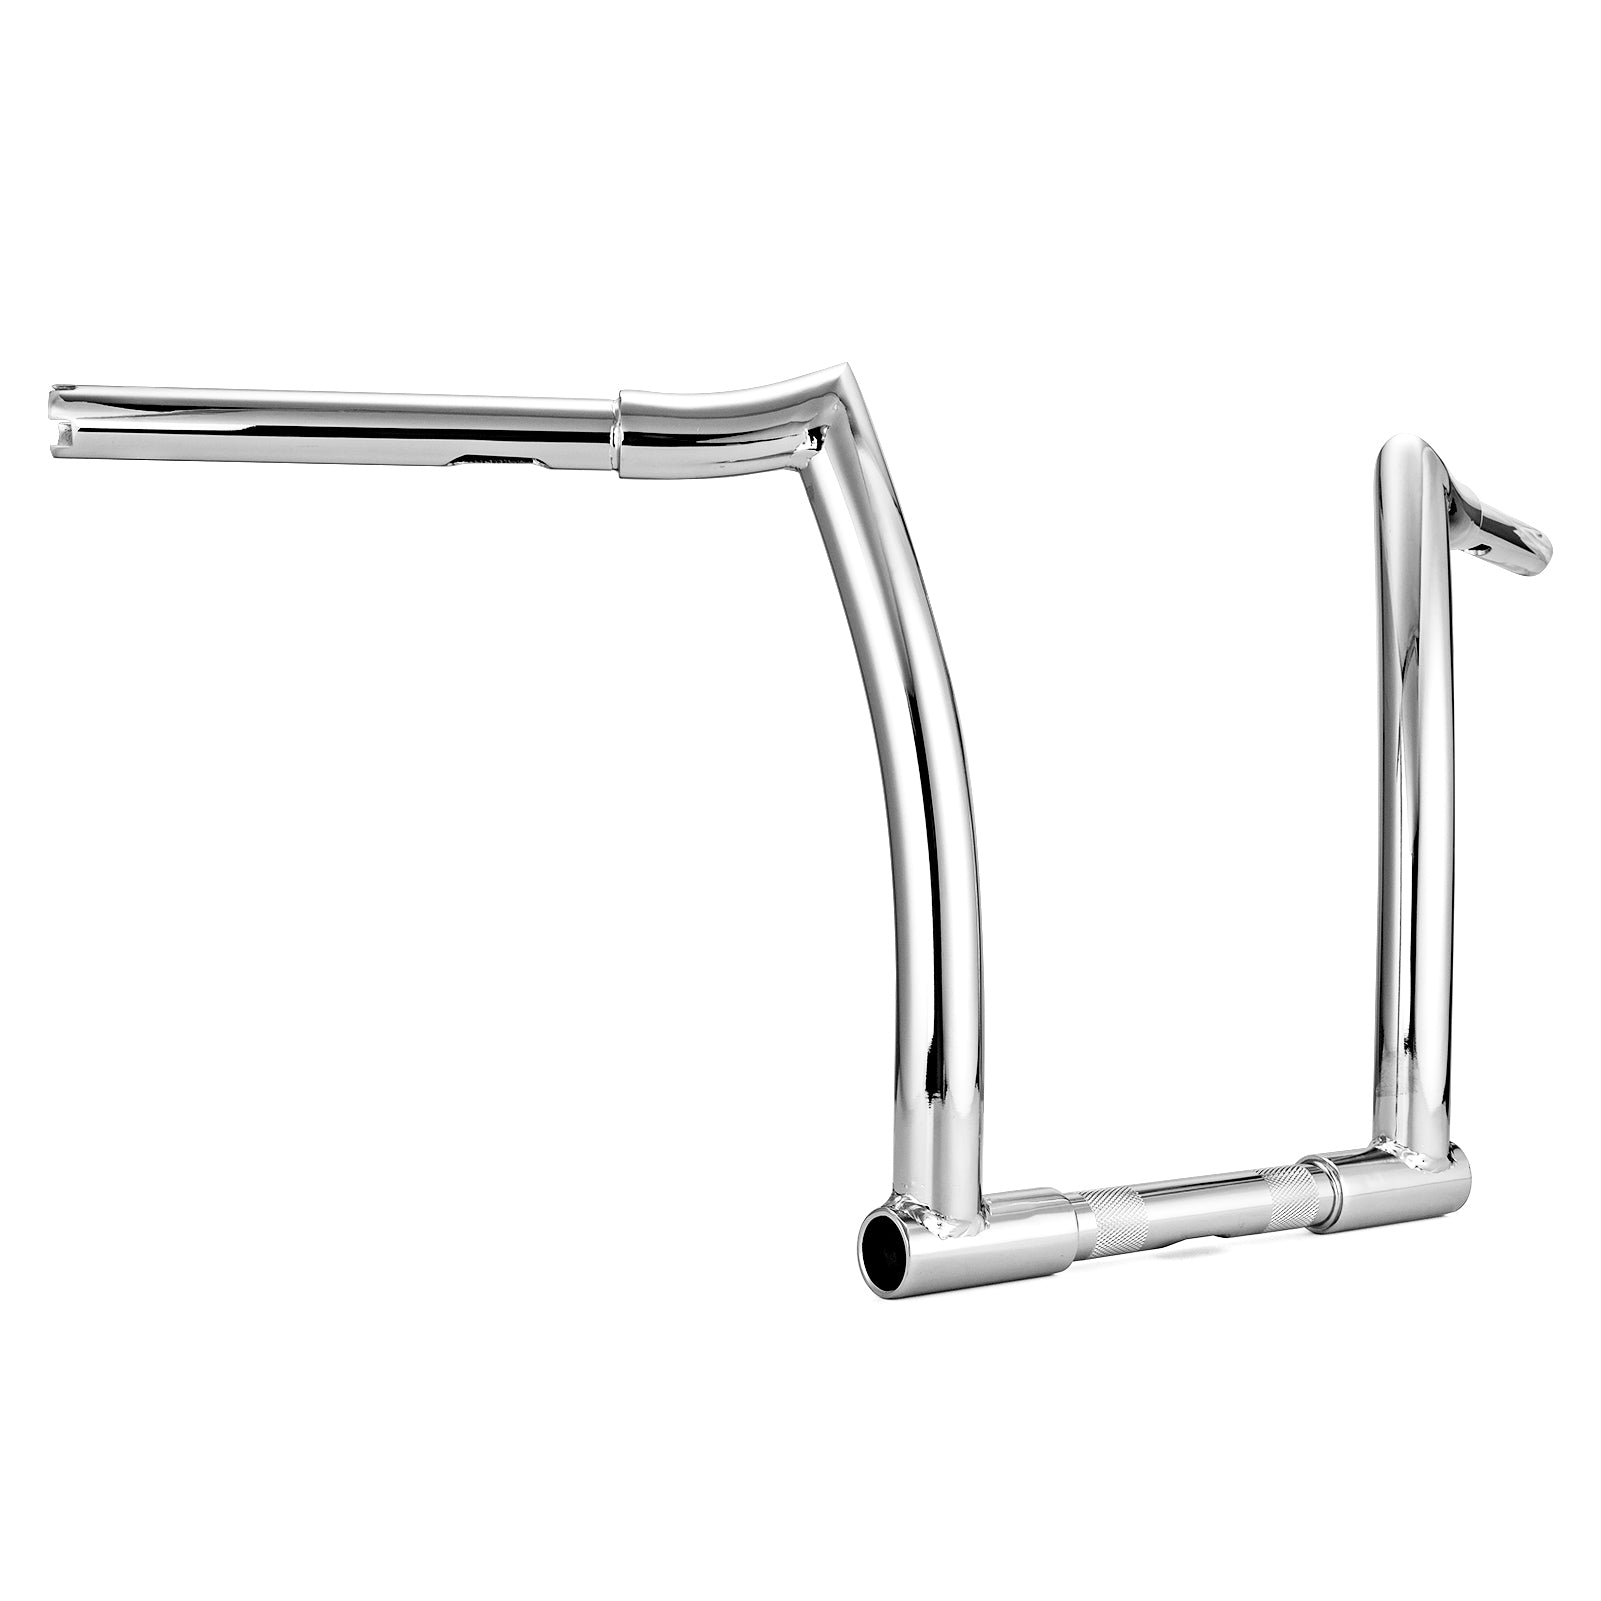 Harley Dyna Wide Glide Low Riders Fat Chizeled Lo 12" Rise 1" Clamp Hanger HandleBar Bars-2